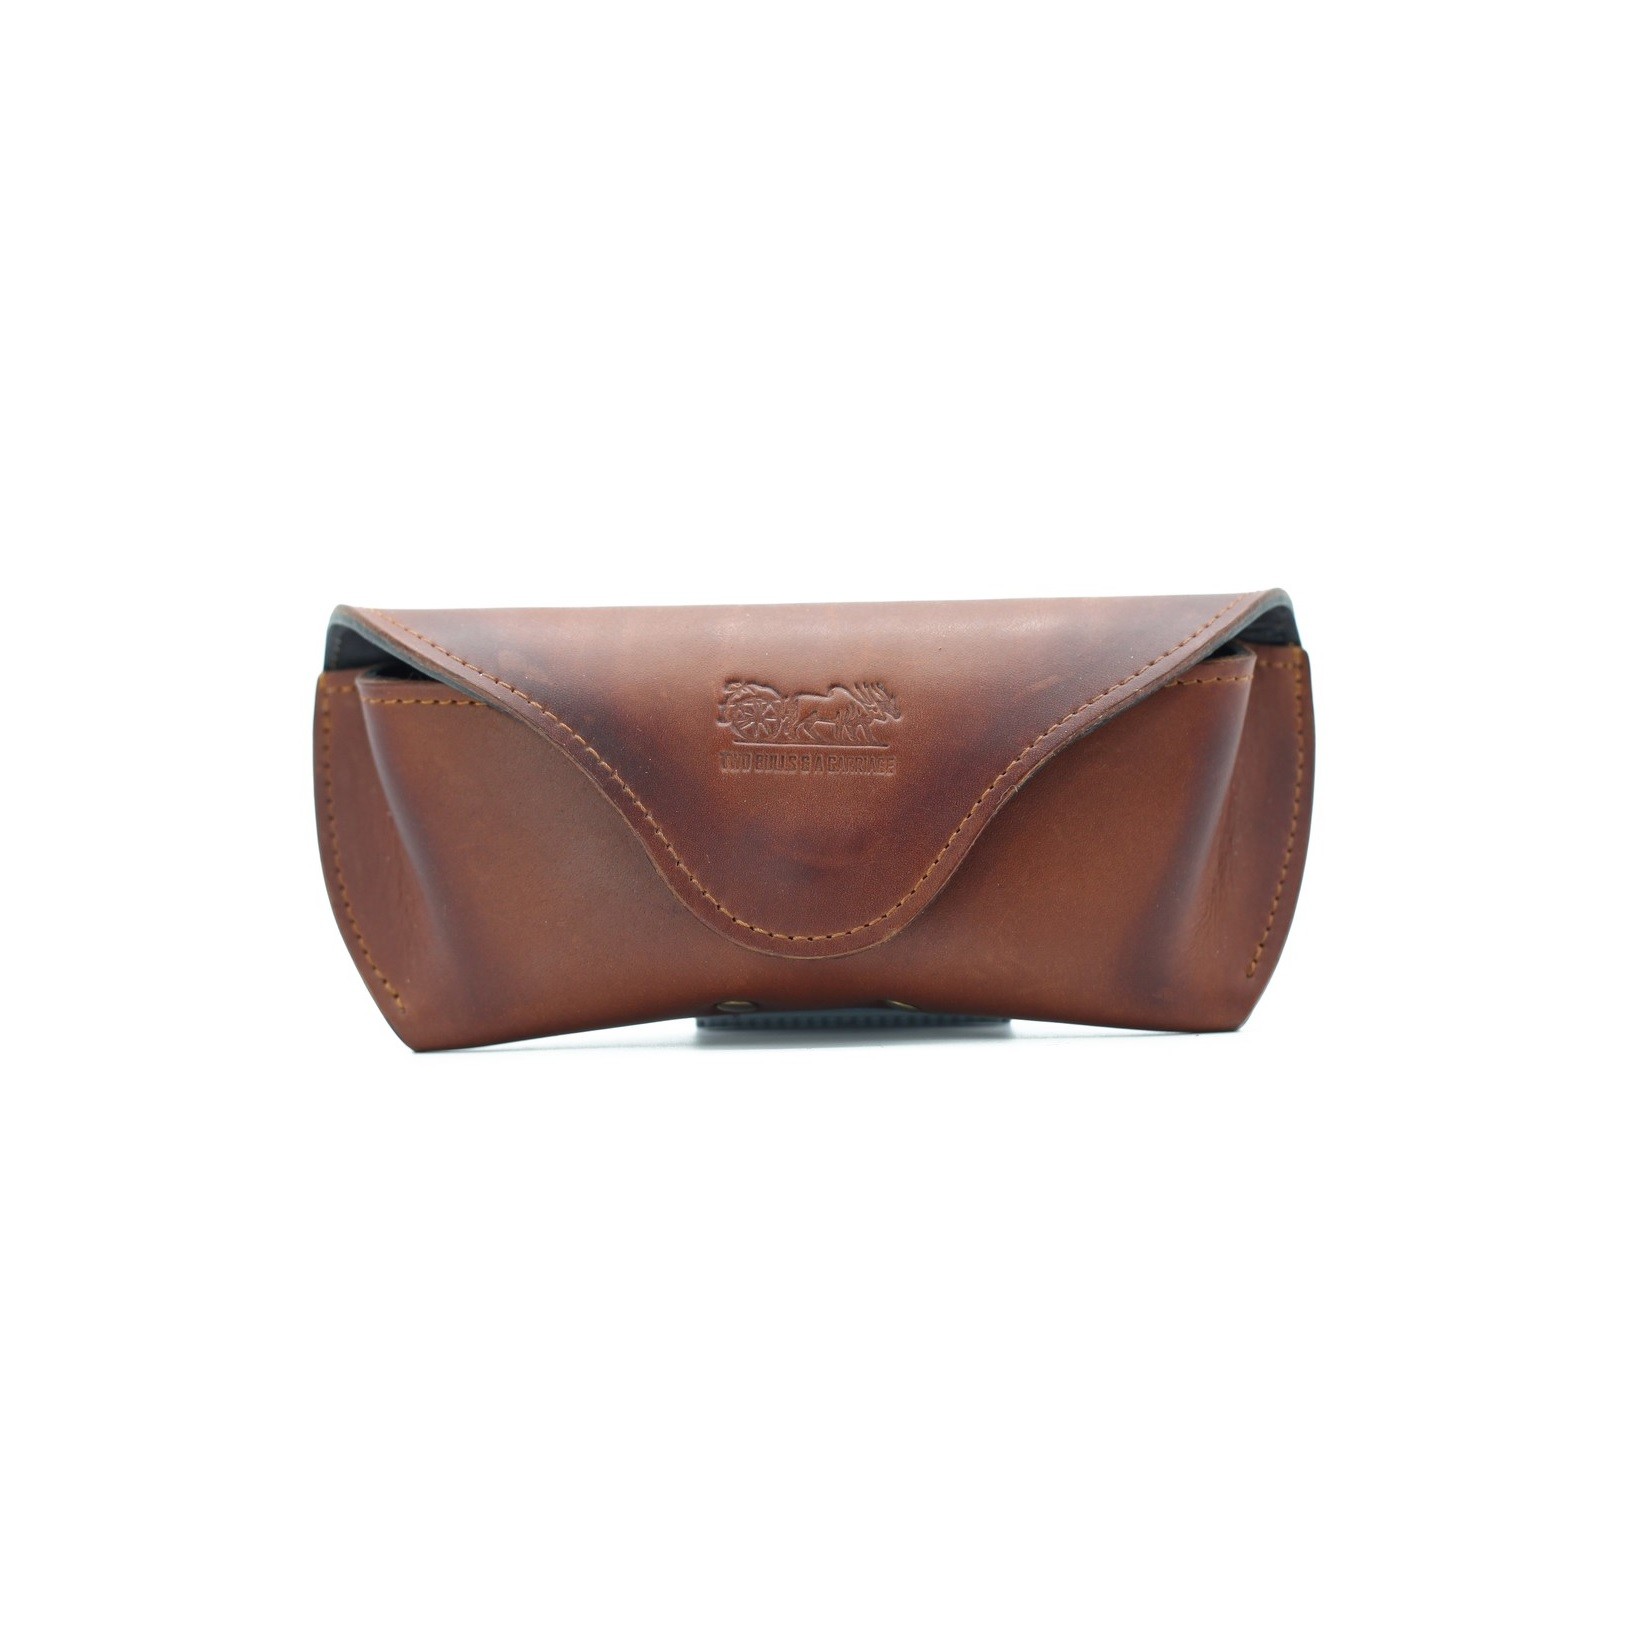 Natural leather Sunglasses case